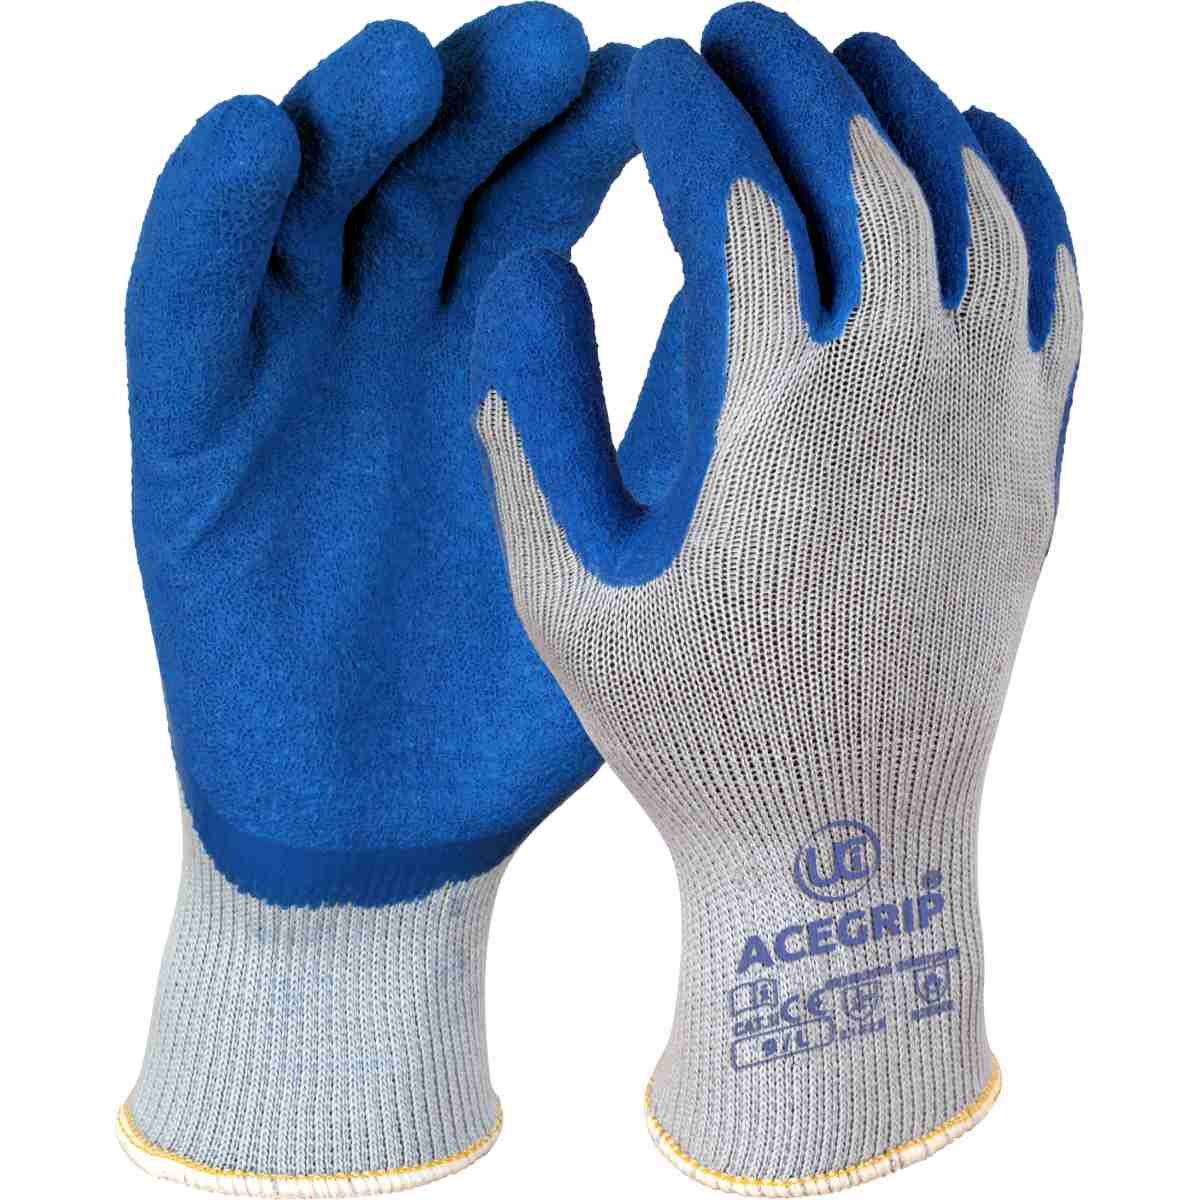 Fully Coated Latex Palm Coated Cut Resistant Glove UCI X5 SUMO FC 